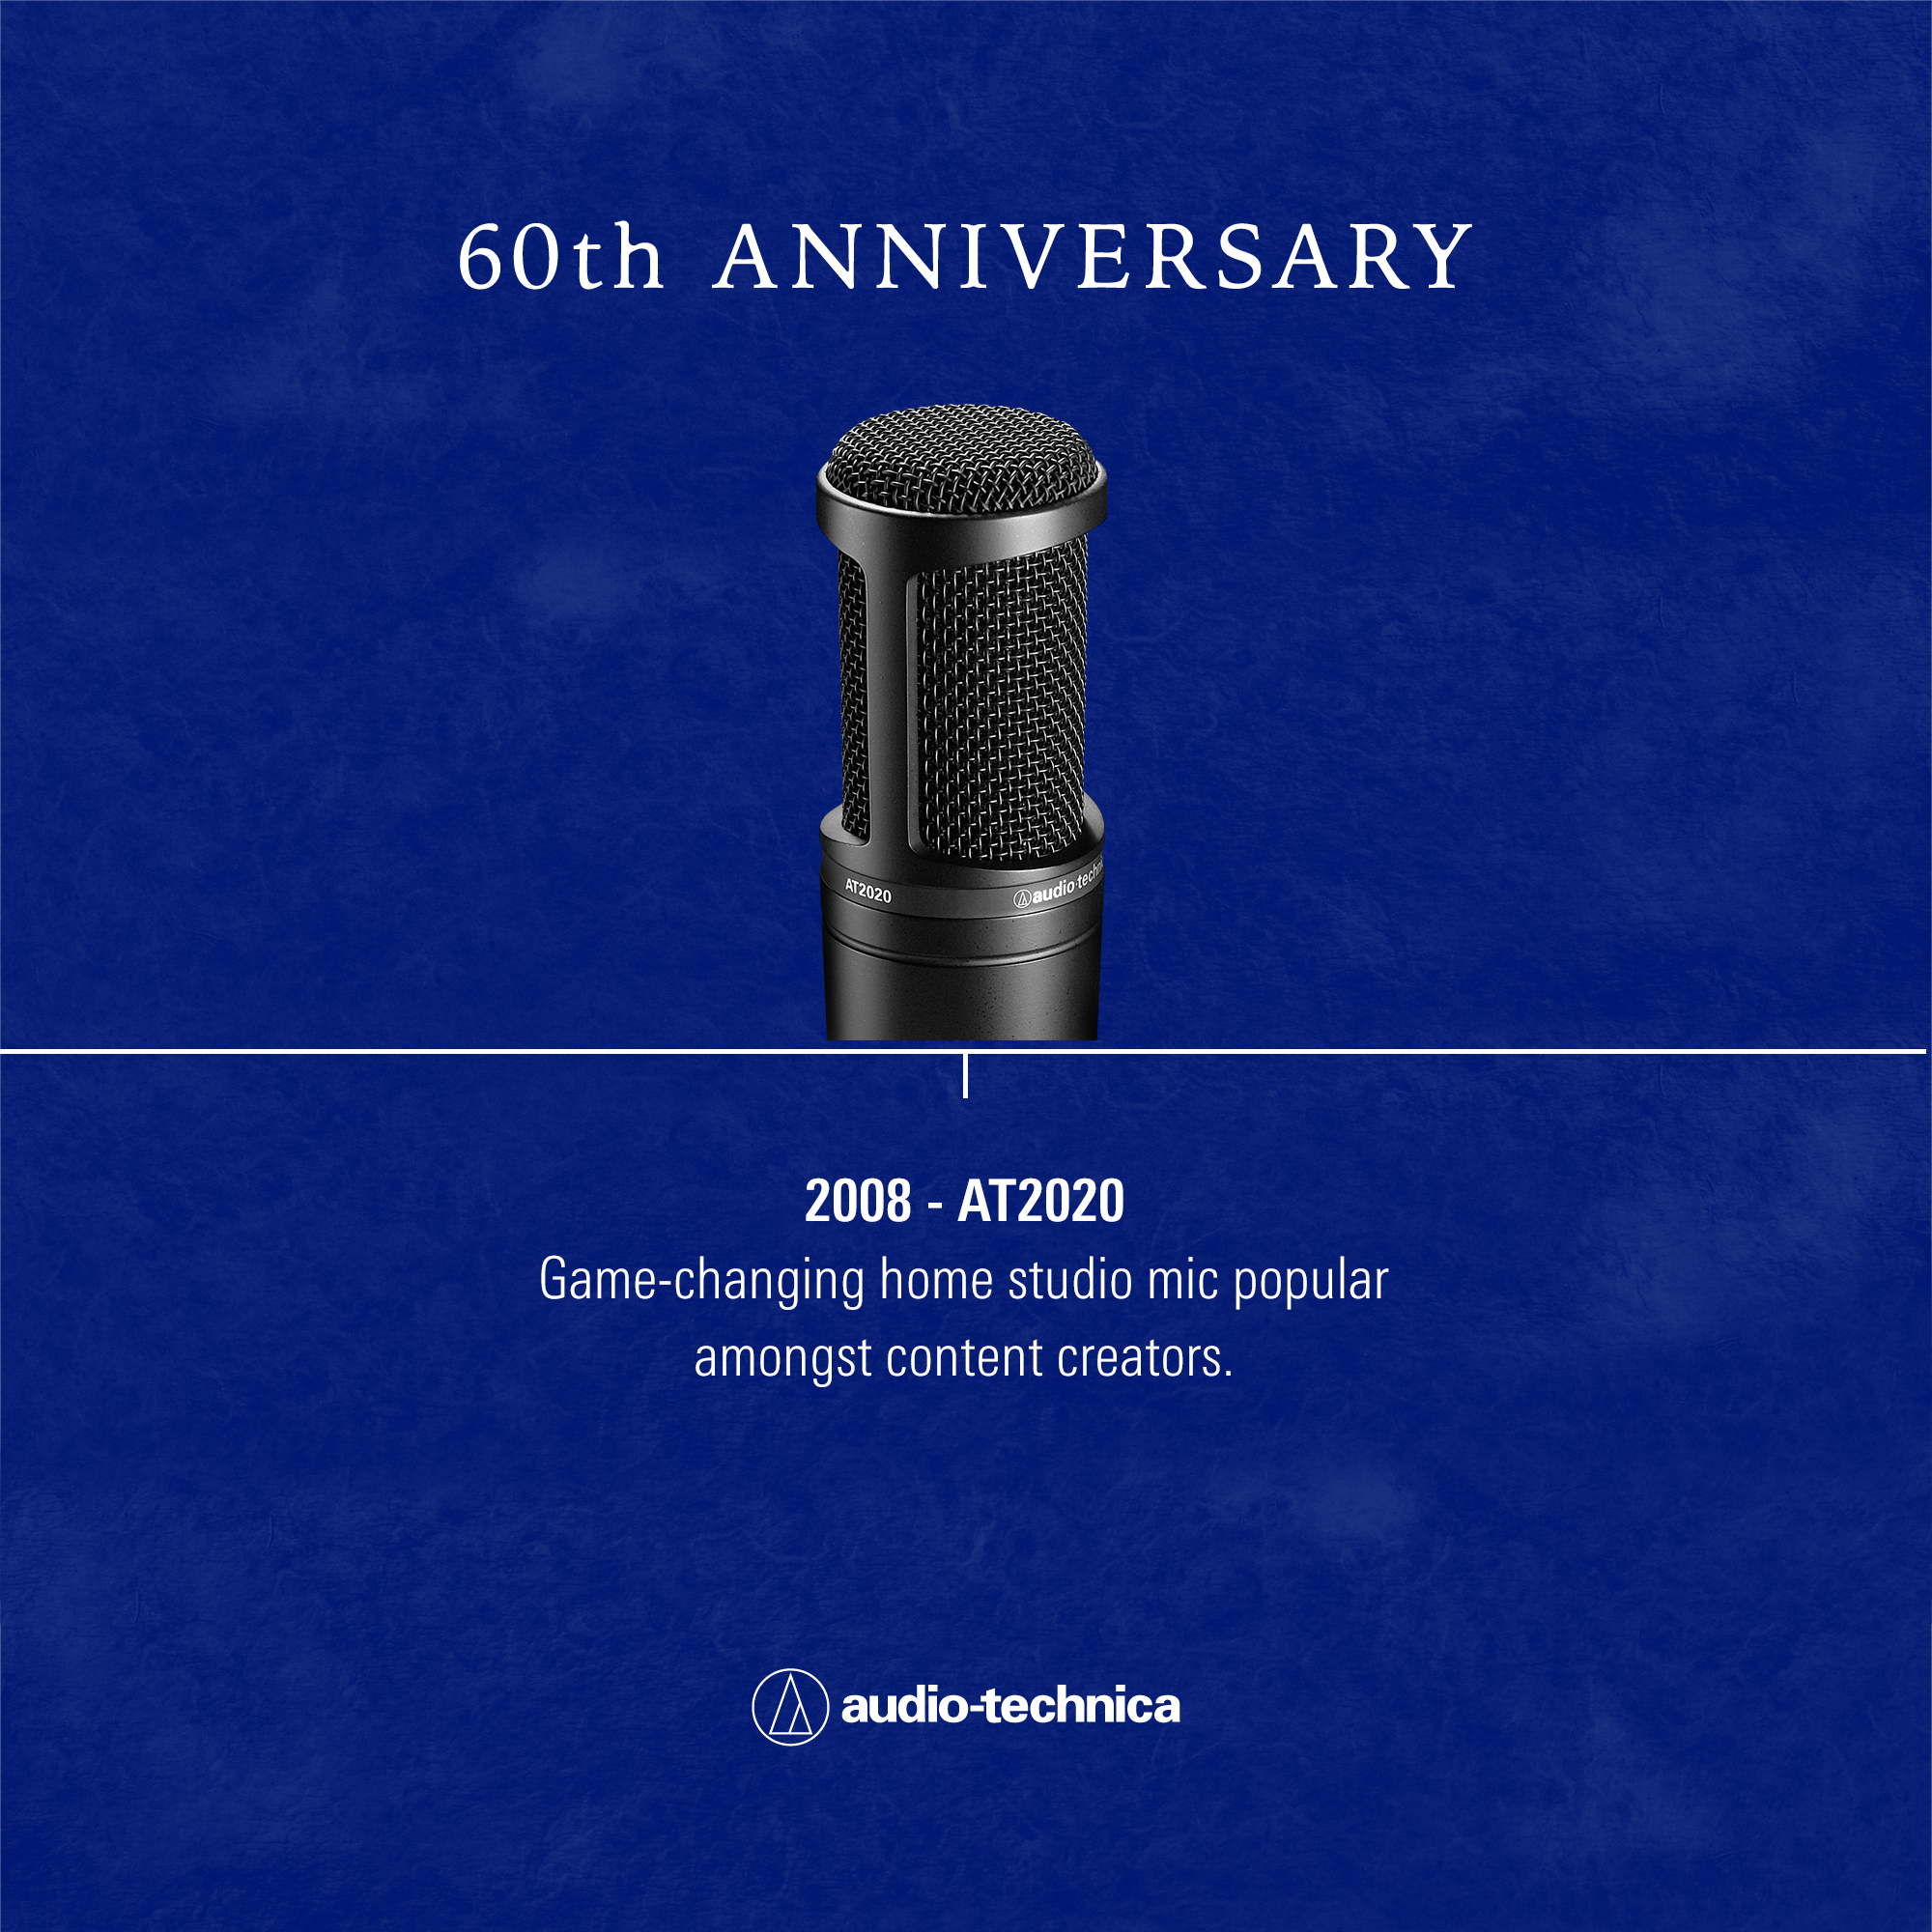 Audio-Technica Celebrates 60 Years of Excellence